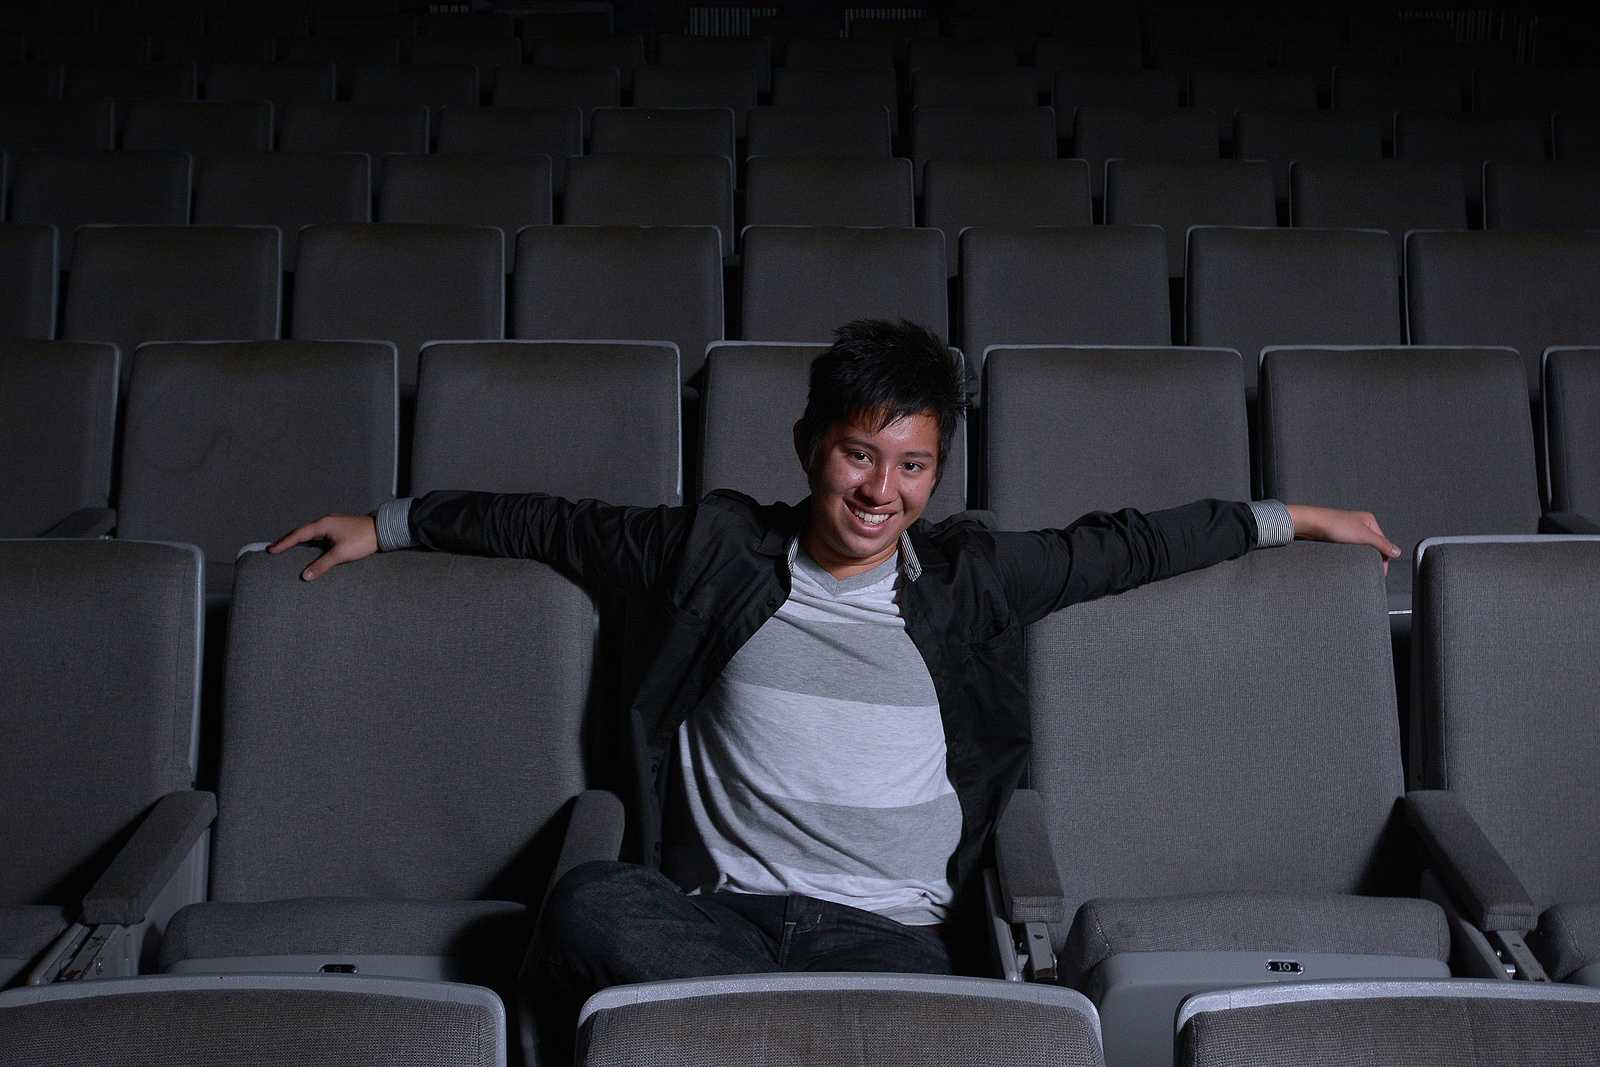 Andrew Wong, sophomore, poses for a portrait at Coppola Theater on Friday, Nov. 15, 2013. Wong was awarded Best Director and Best Picture for his film 